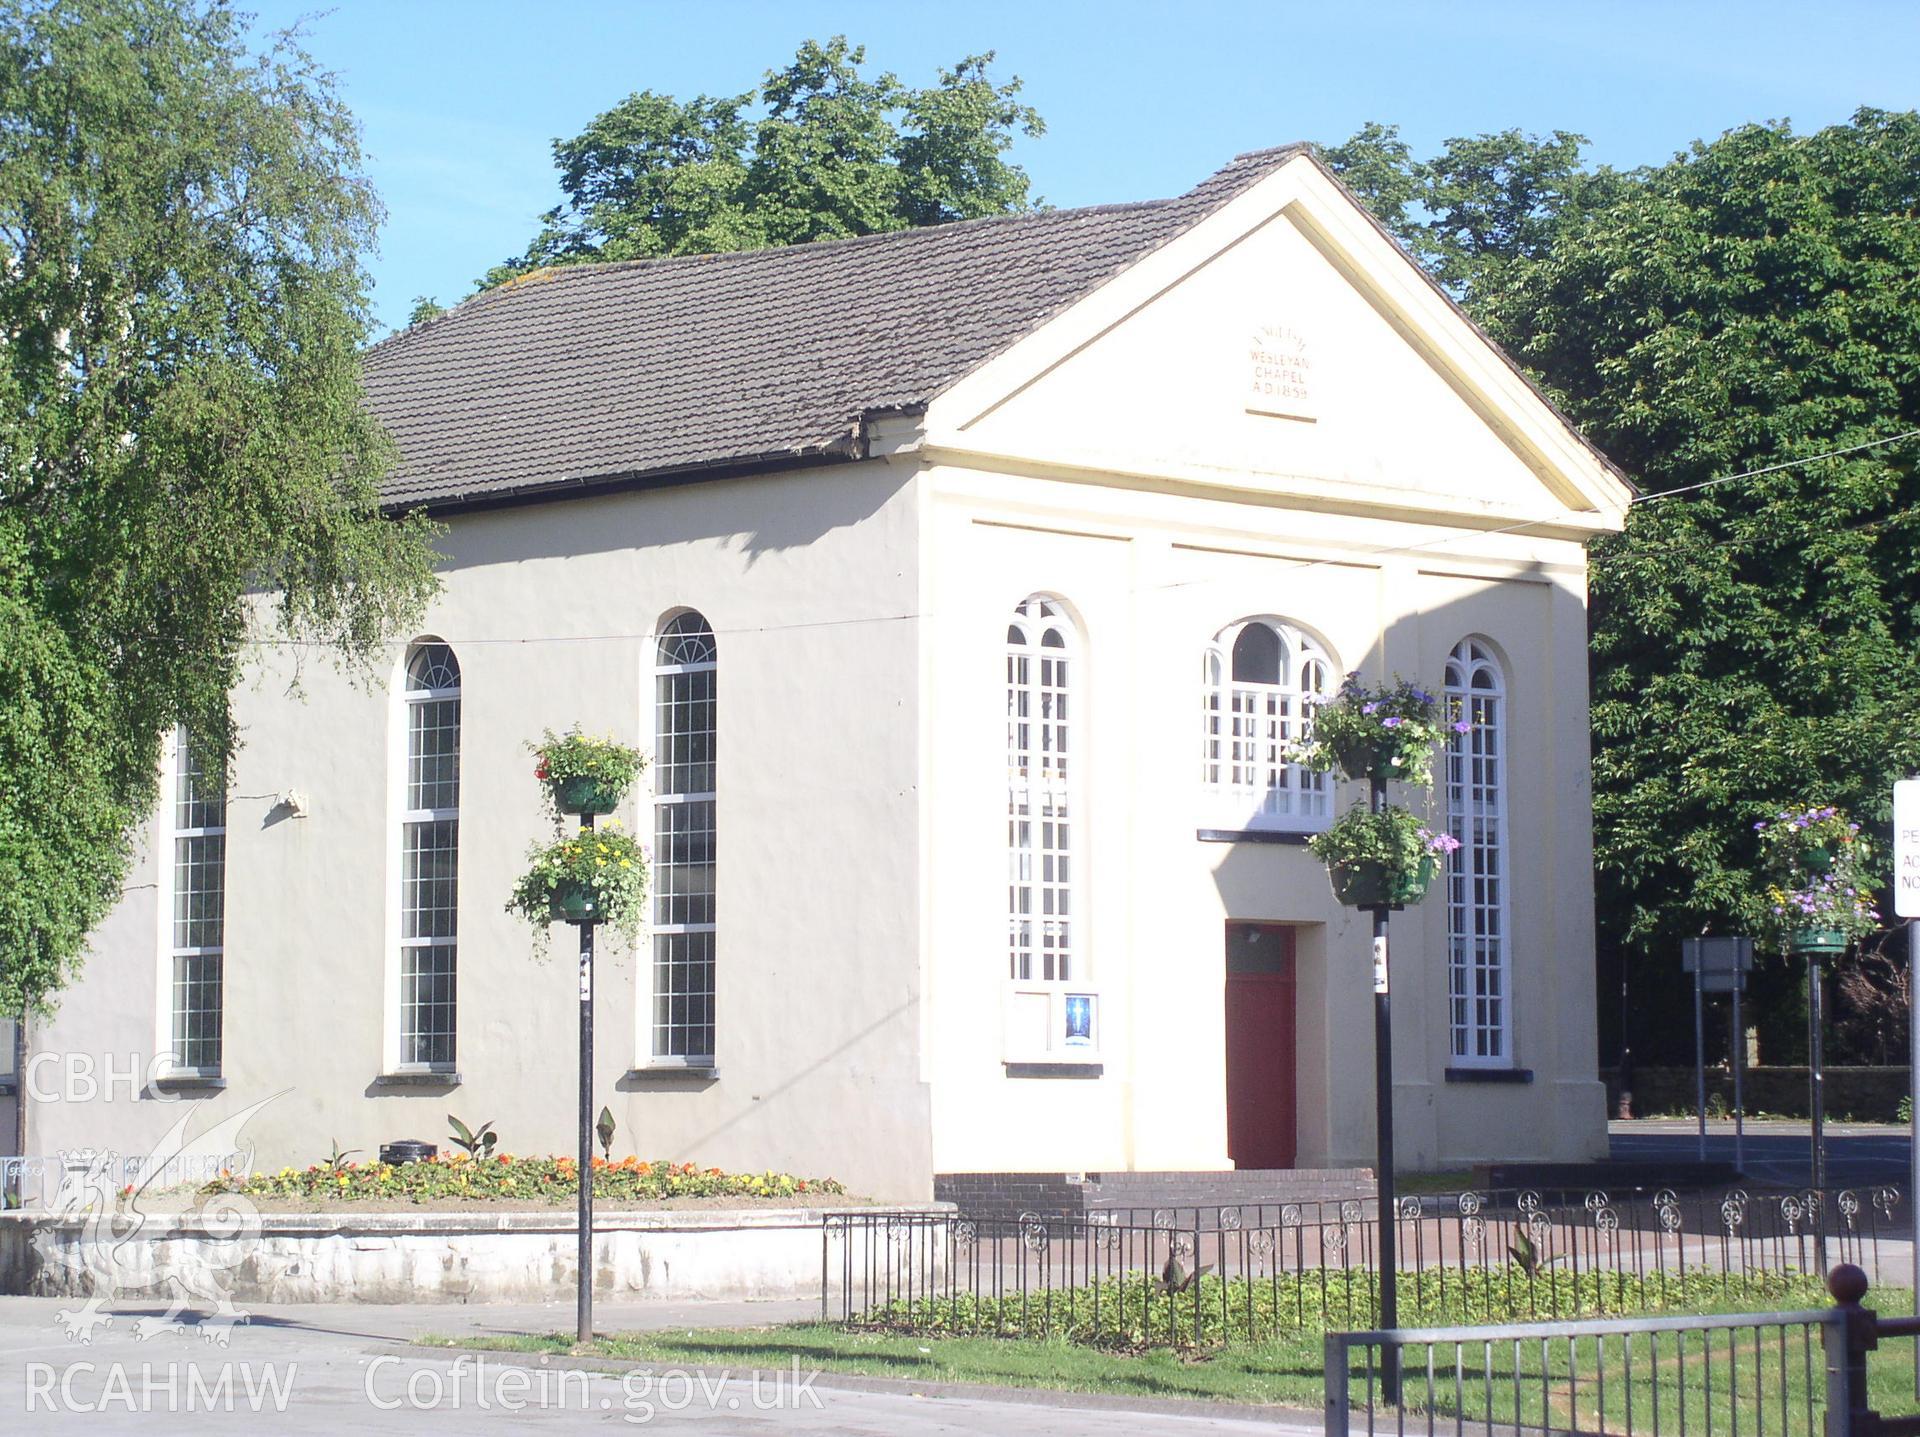 Colour digital photograph showing the exterior of the Green Street English Wesleyan Methodist Chapel in Aberdare, Glamorgan.